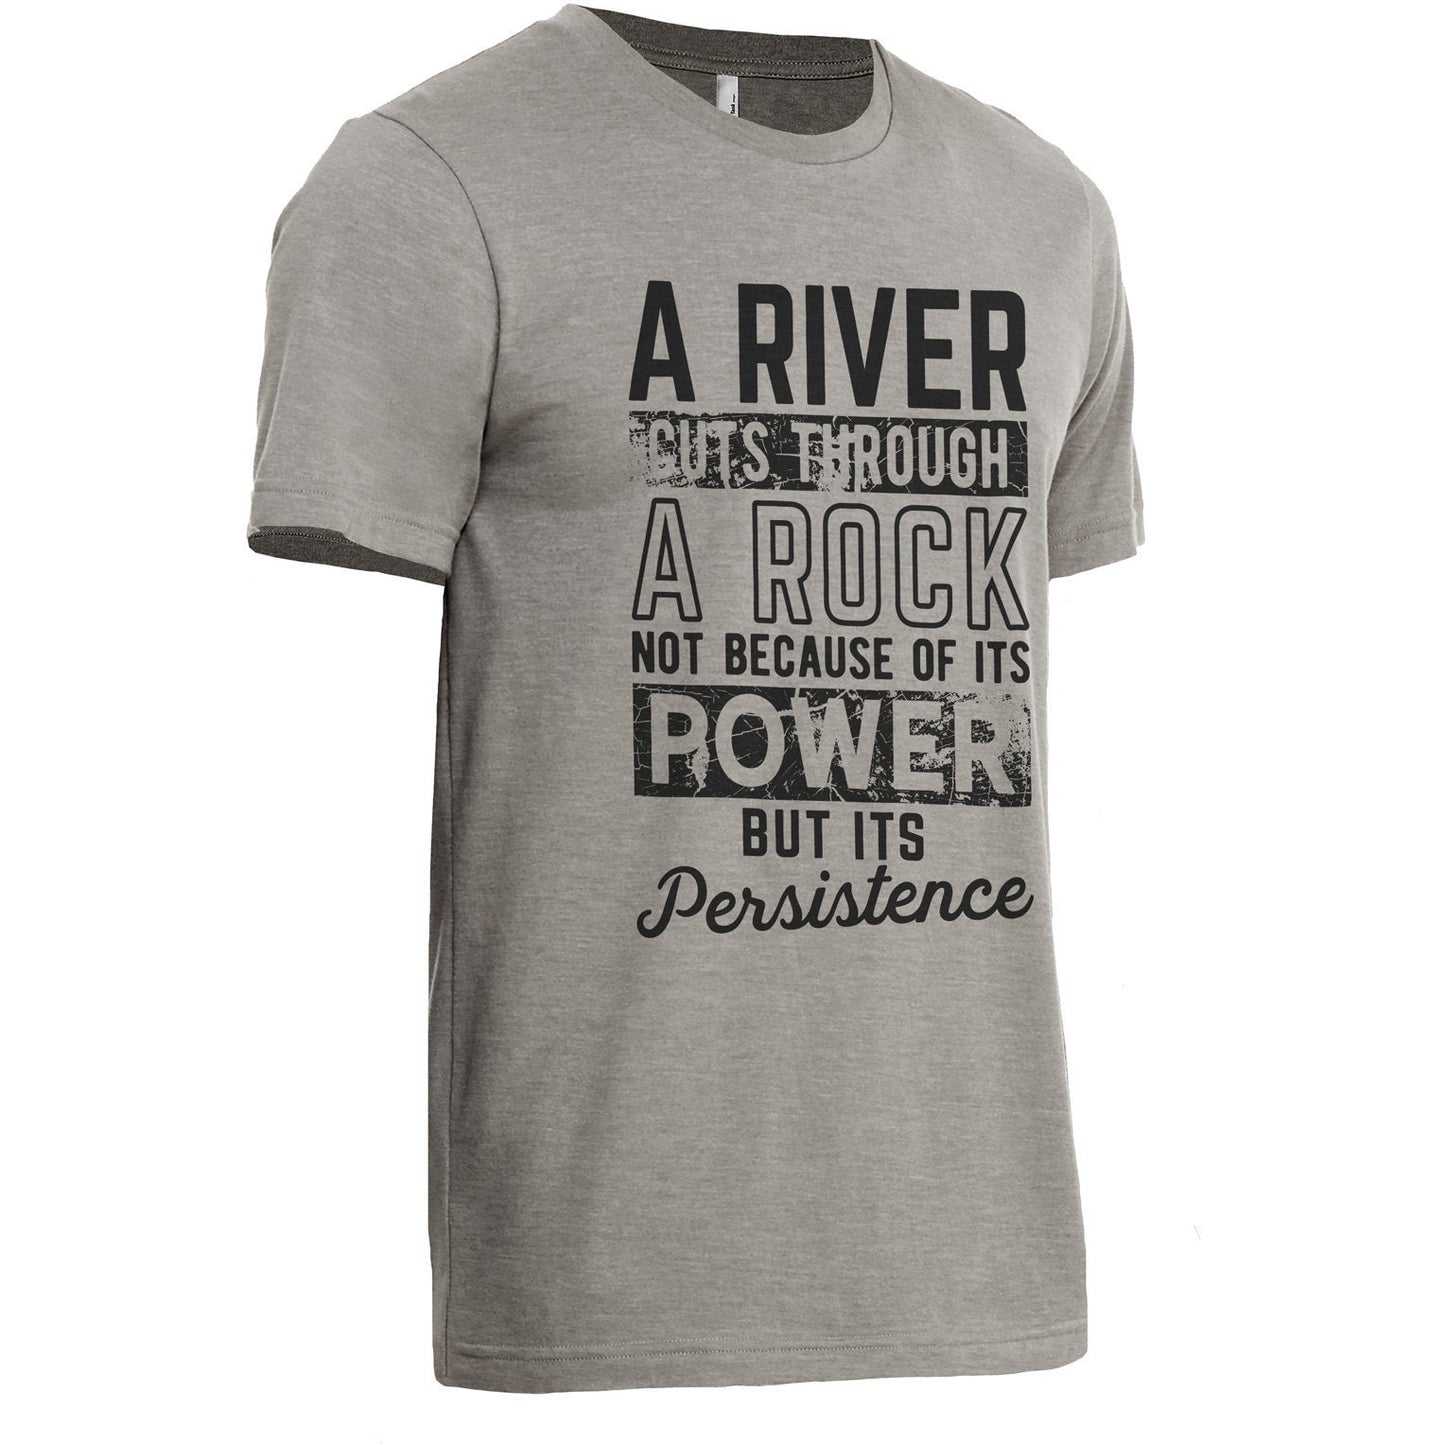 A River Cuts Through A Rock Not Because Of It's Power But It's Persistence Military Grey Printed Graphic Men's Crew T-Shirt Tee Side View